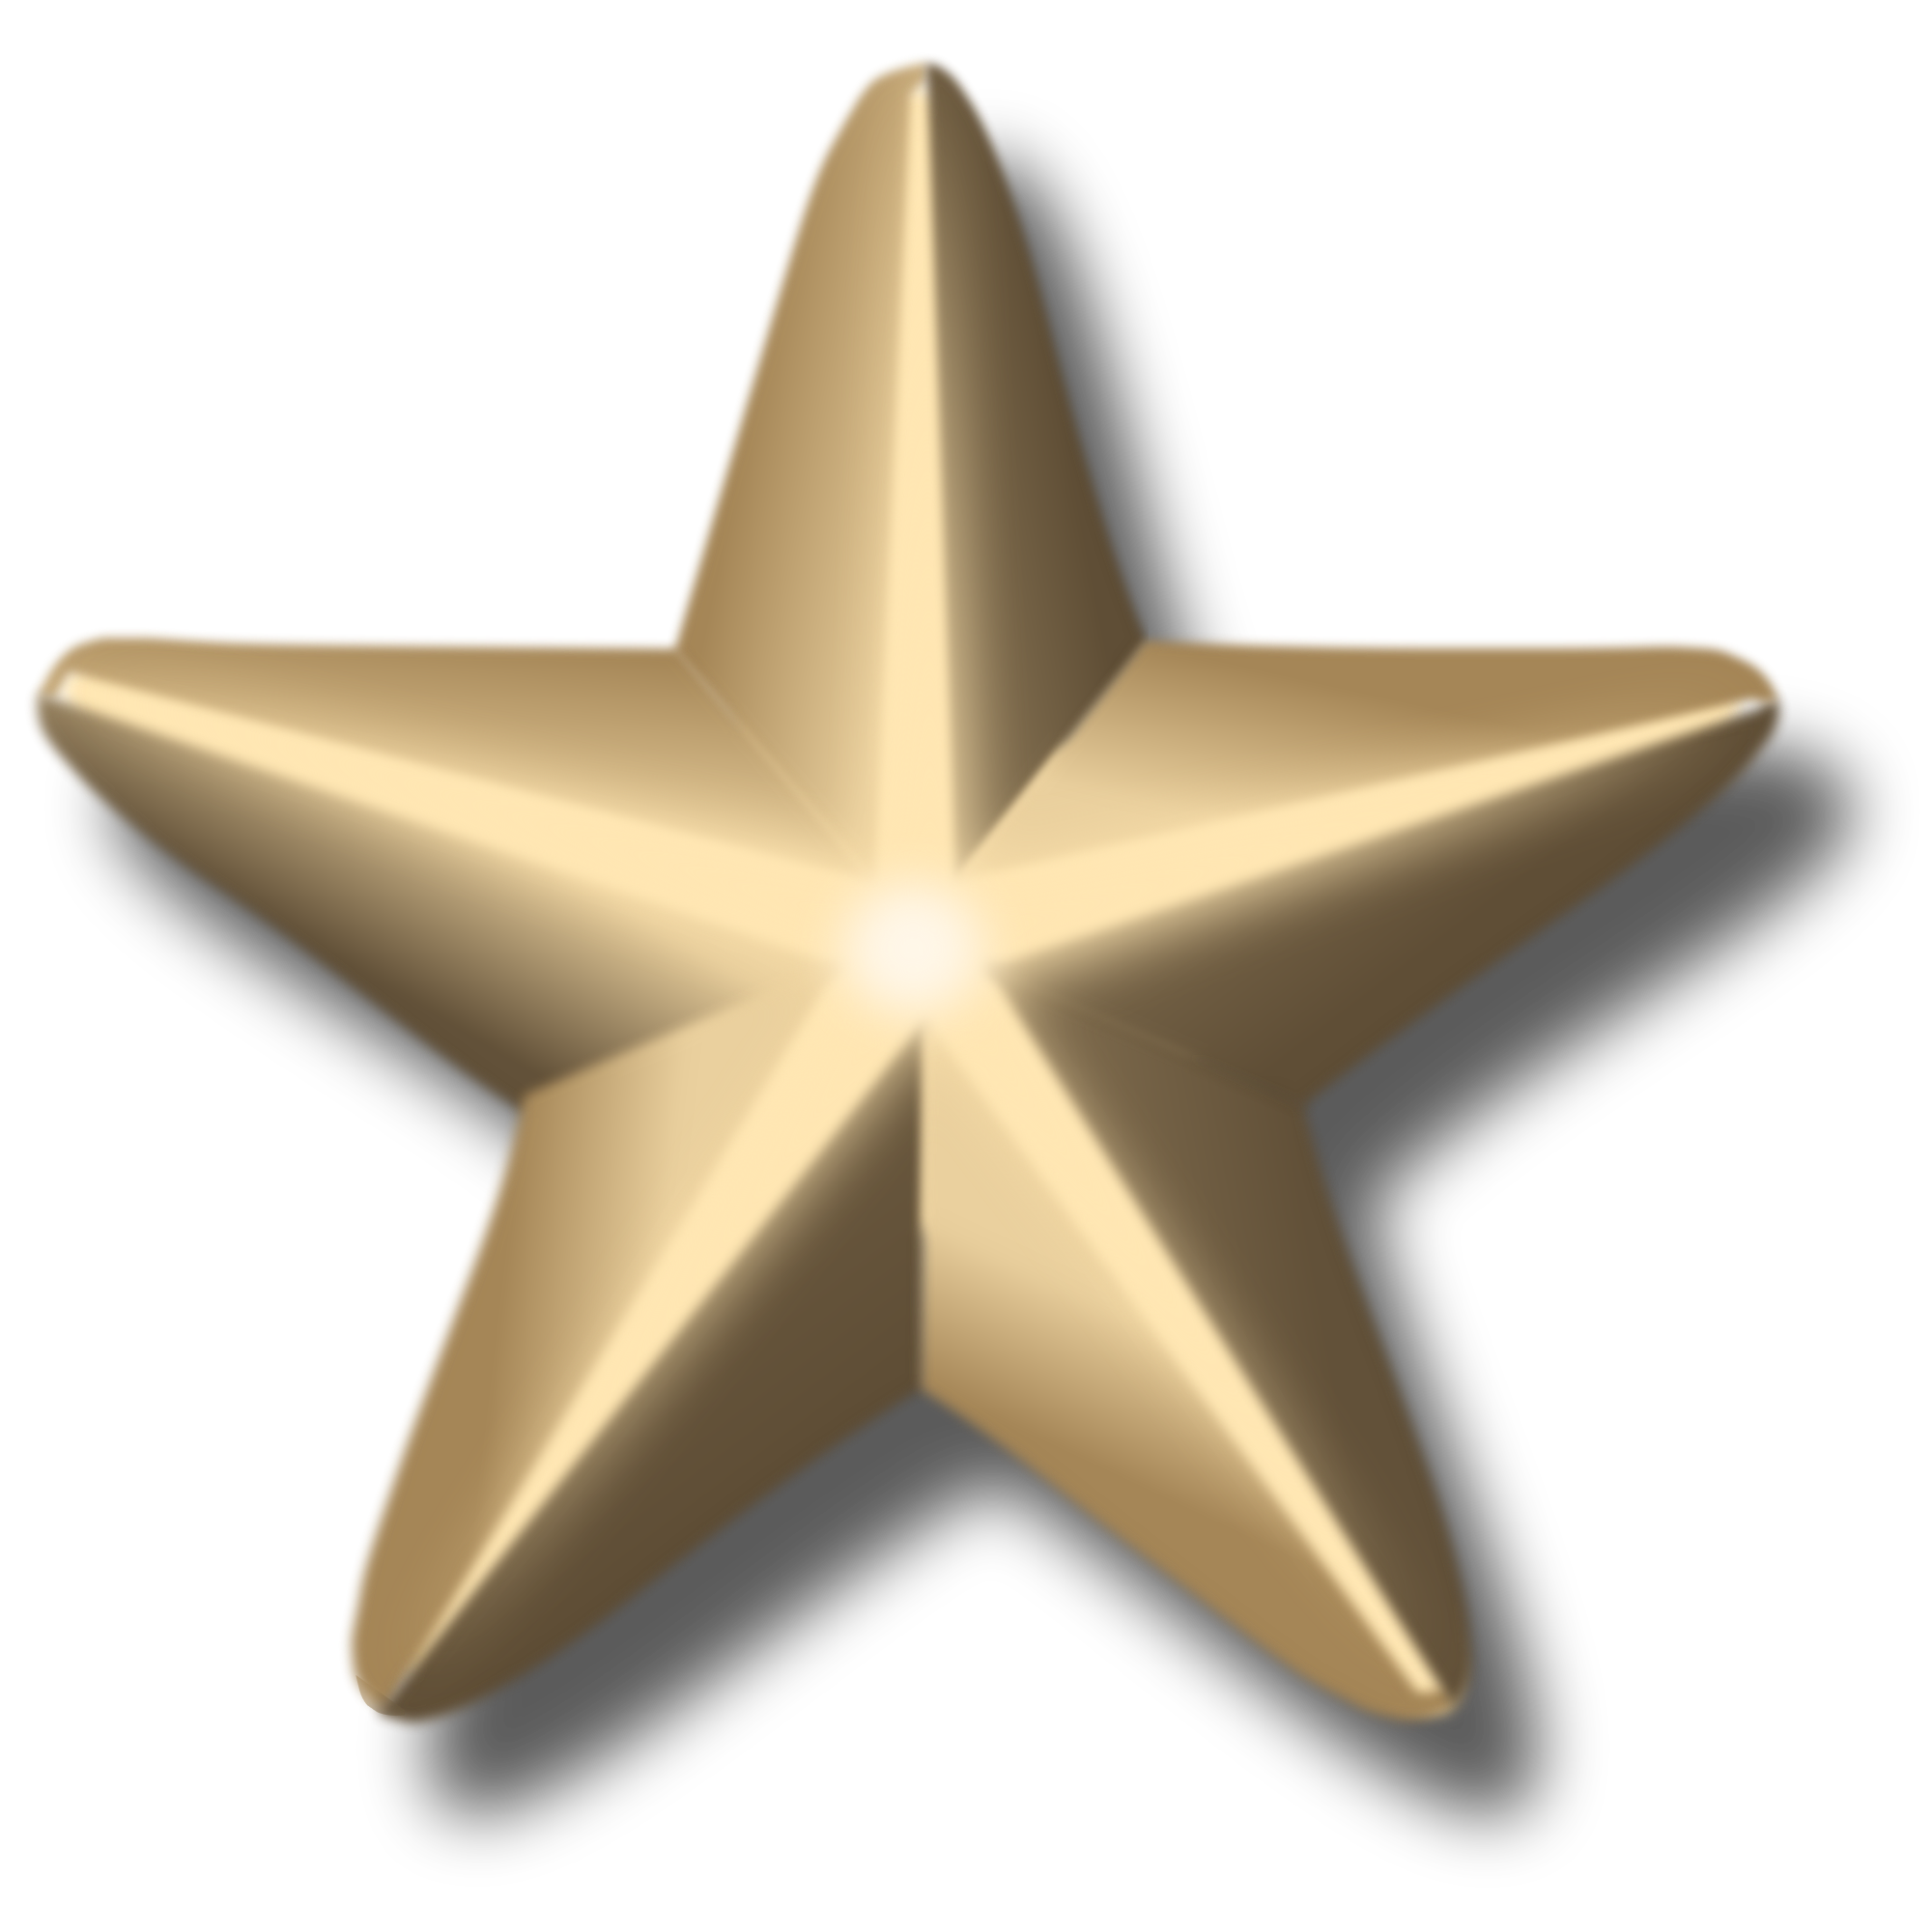 File:Award-star-gold-3d.svg - Wikimedia Commons